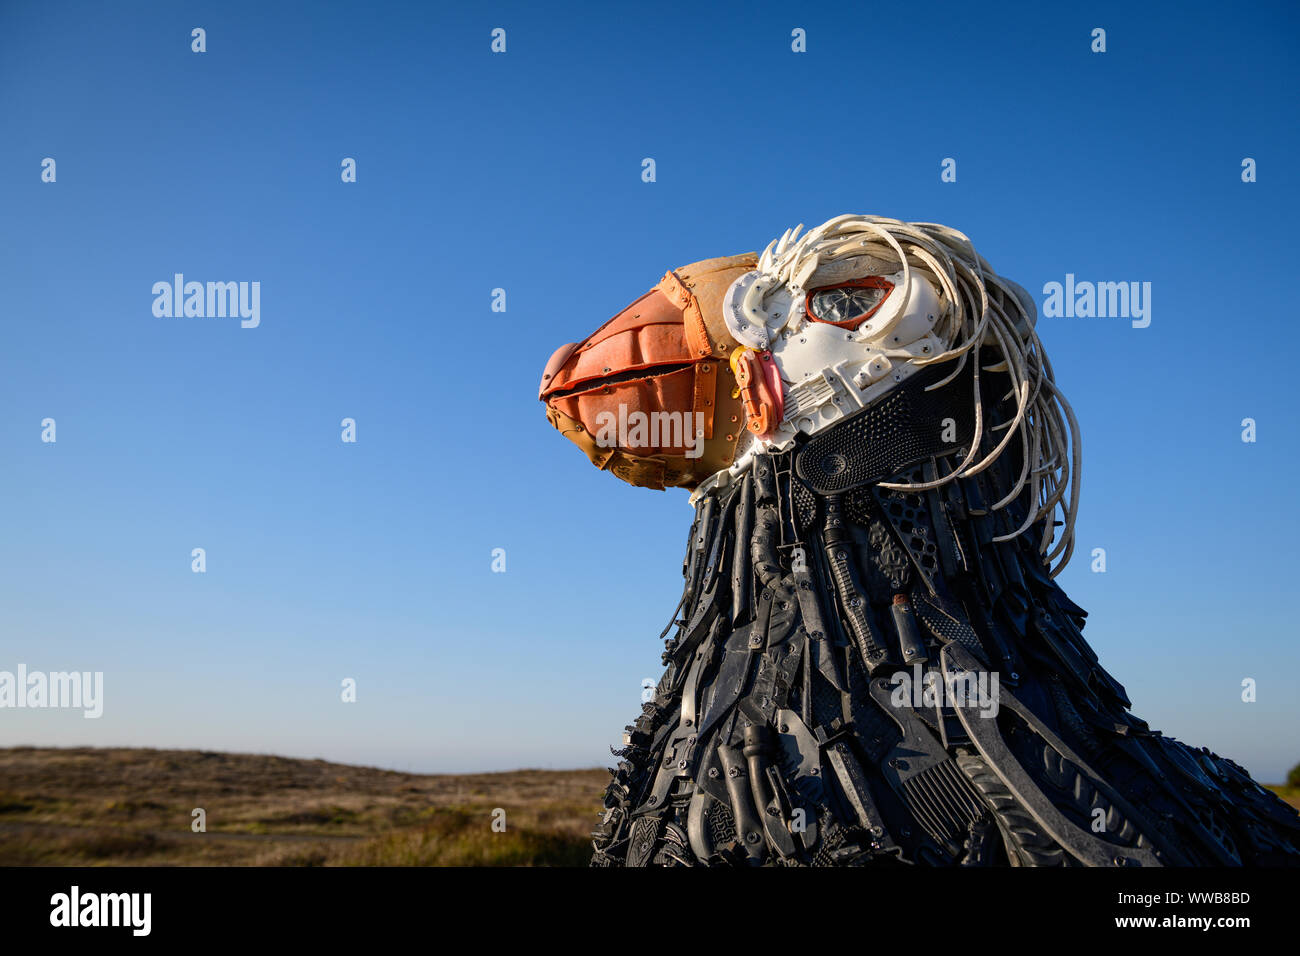 Cosmo the tufted puffin in Bandon Beach Oregon. The trash puffin was made entirely out of plastic washed ashore on the beaches around Bandon, Oregon b Stock Photo